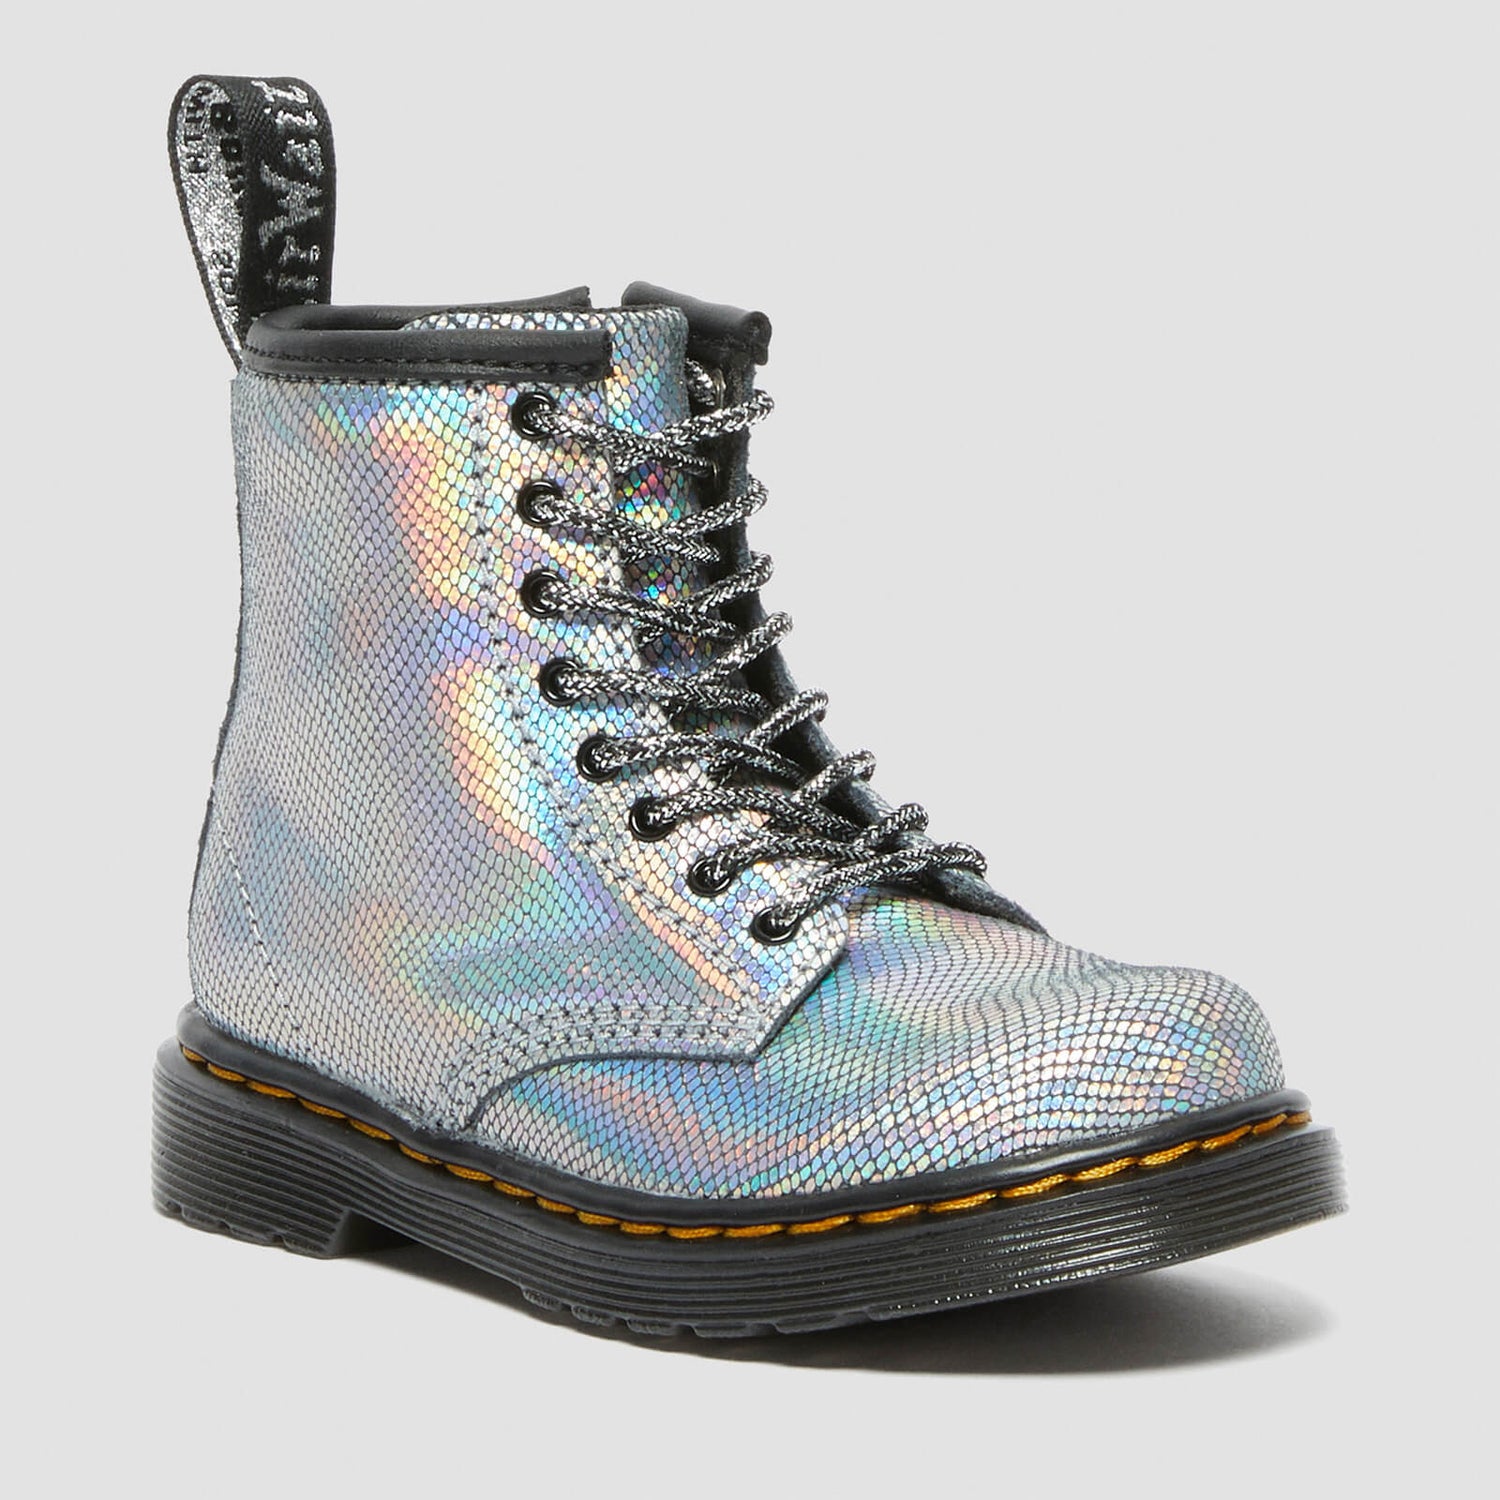 Dr. Martens Toddlers' 1460 T Iridescent Reptile Boots - Silver - UK 5.5 Toddler